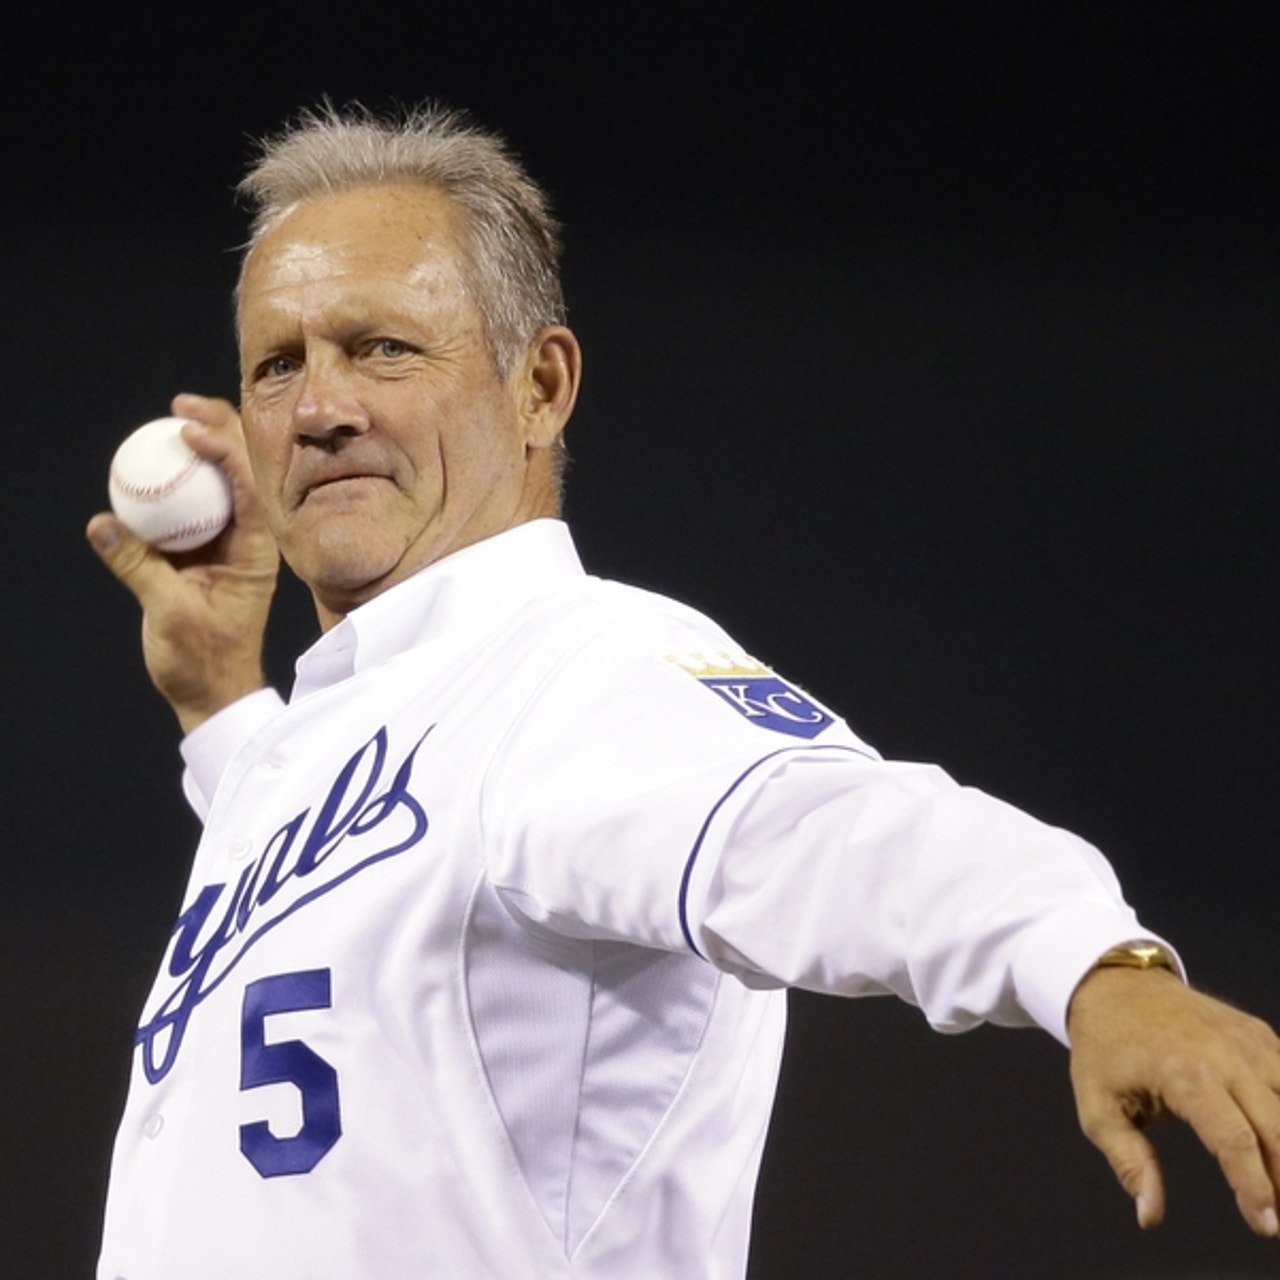 Royals Legend George Brett Stroked His 3,000th Hit 24 Years Ago